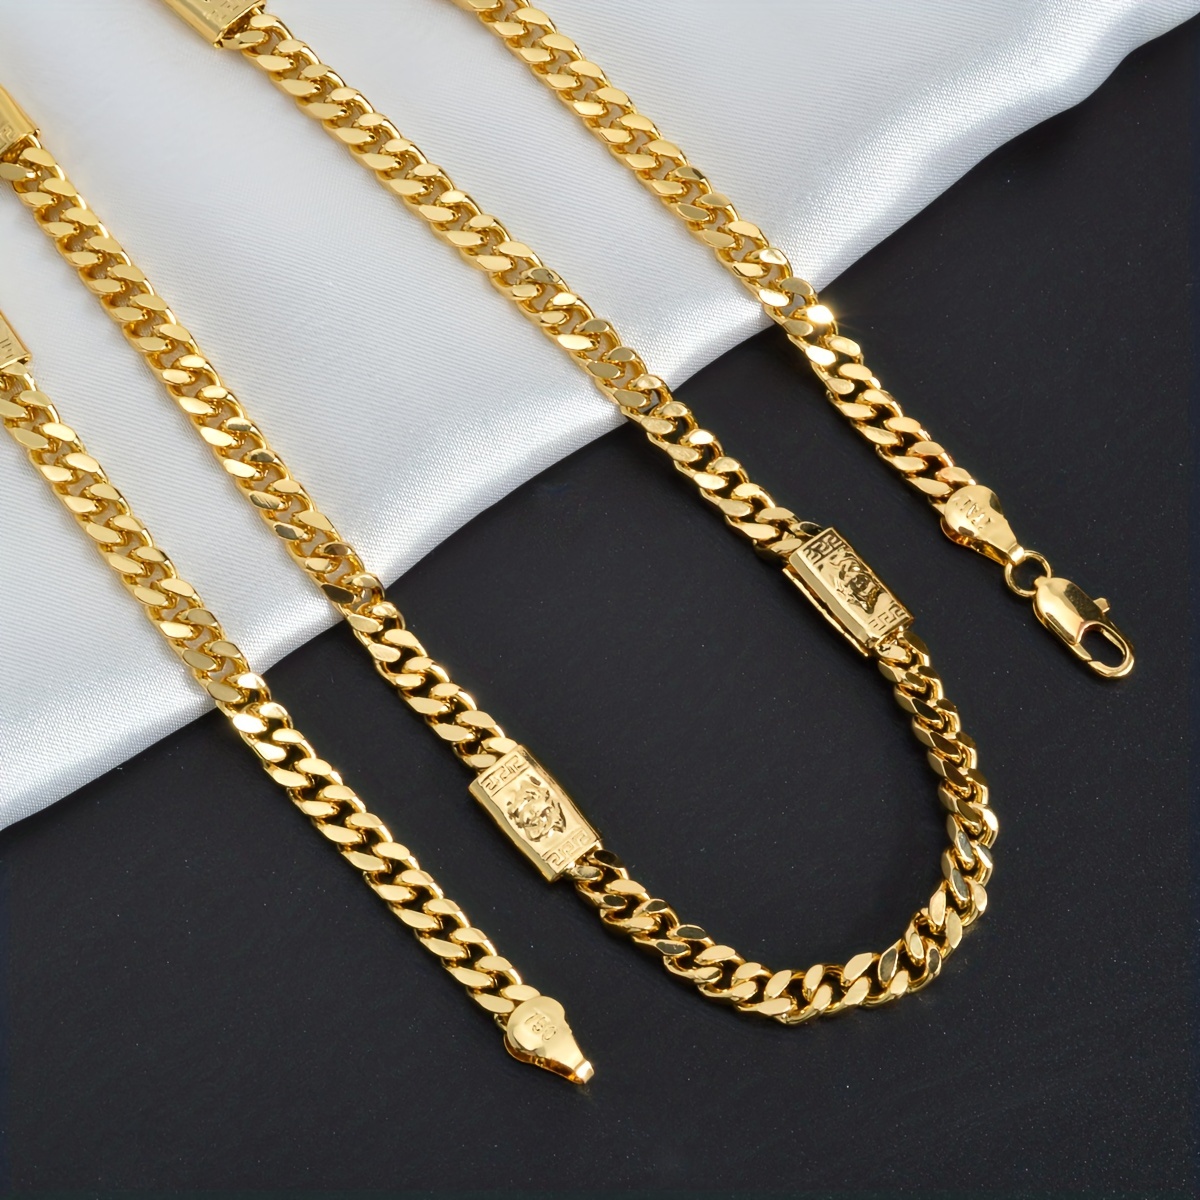 1pc 5mm Golden Link Chain Cuban Necklace for Men and Women - Durable Copper, Electroplated with 18K Gold for Long-Lasting Shine and Style Jewelry